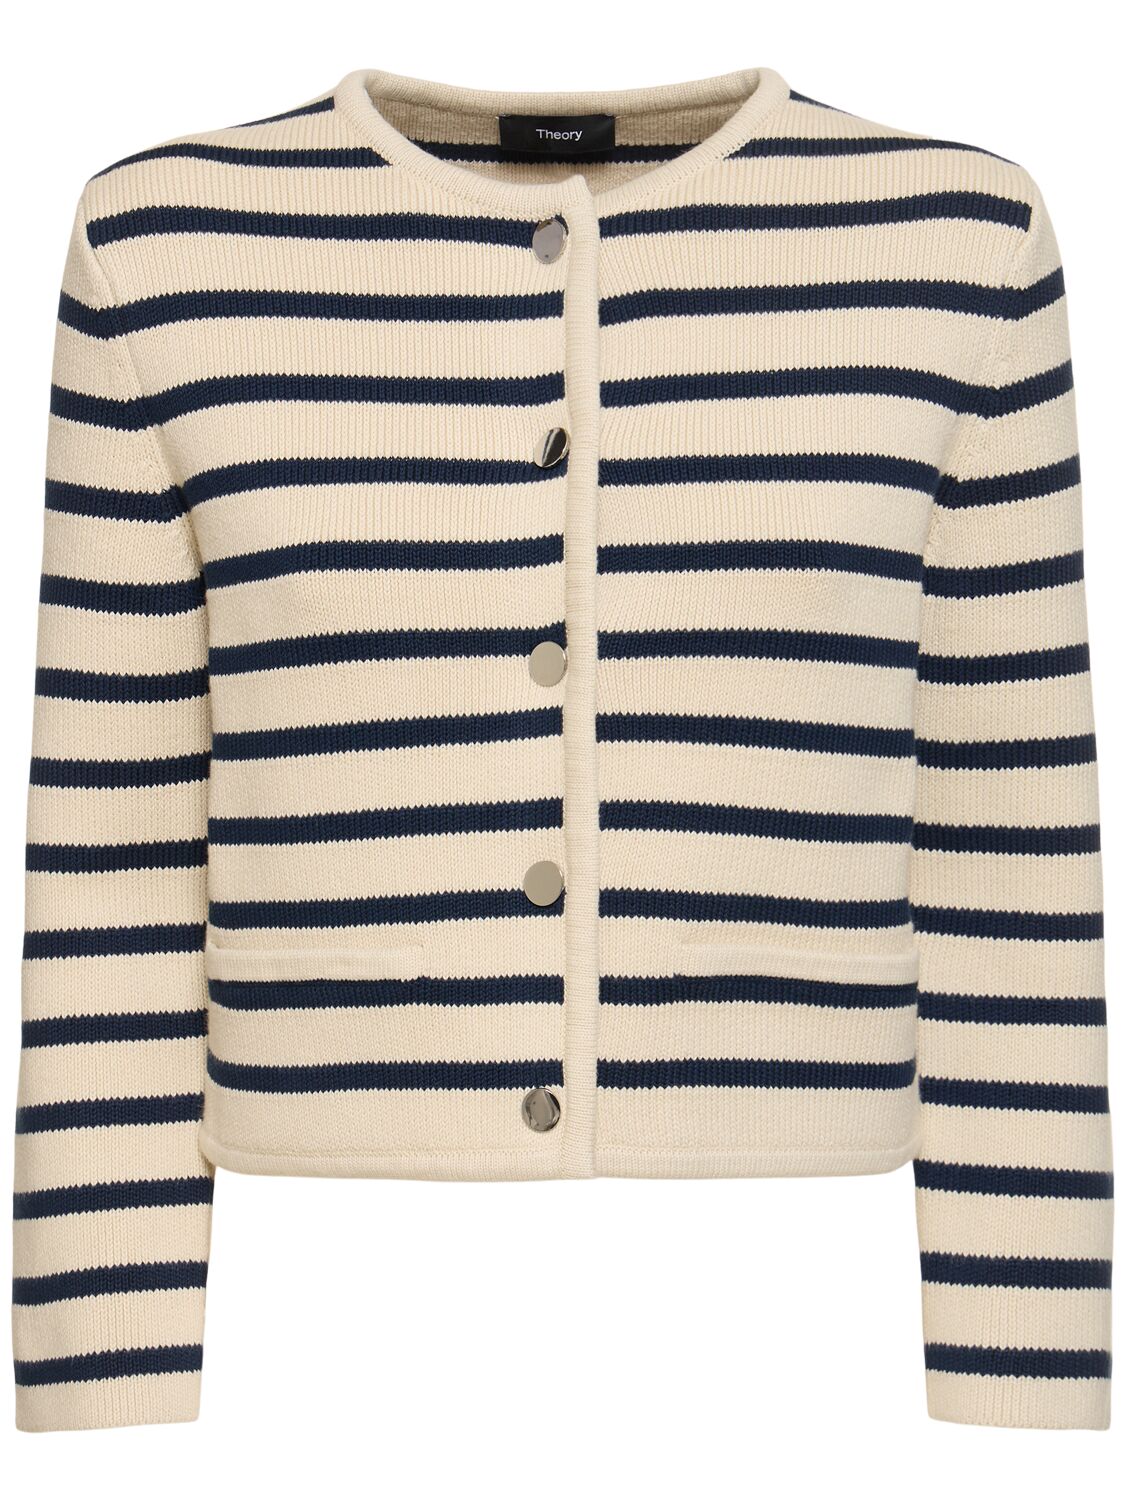 Theory Knitted Cotton Cardigan In Cream/blue